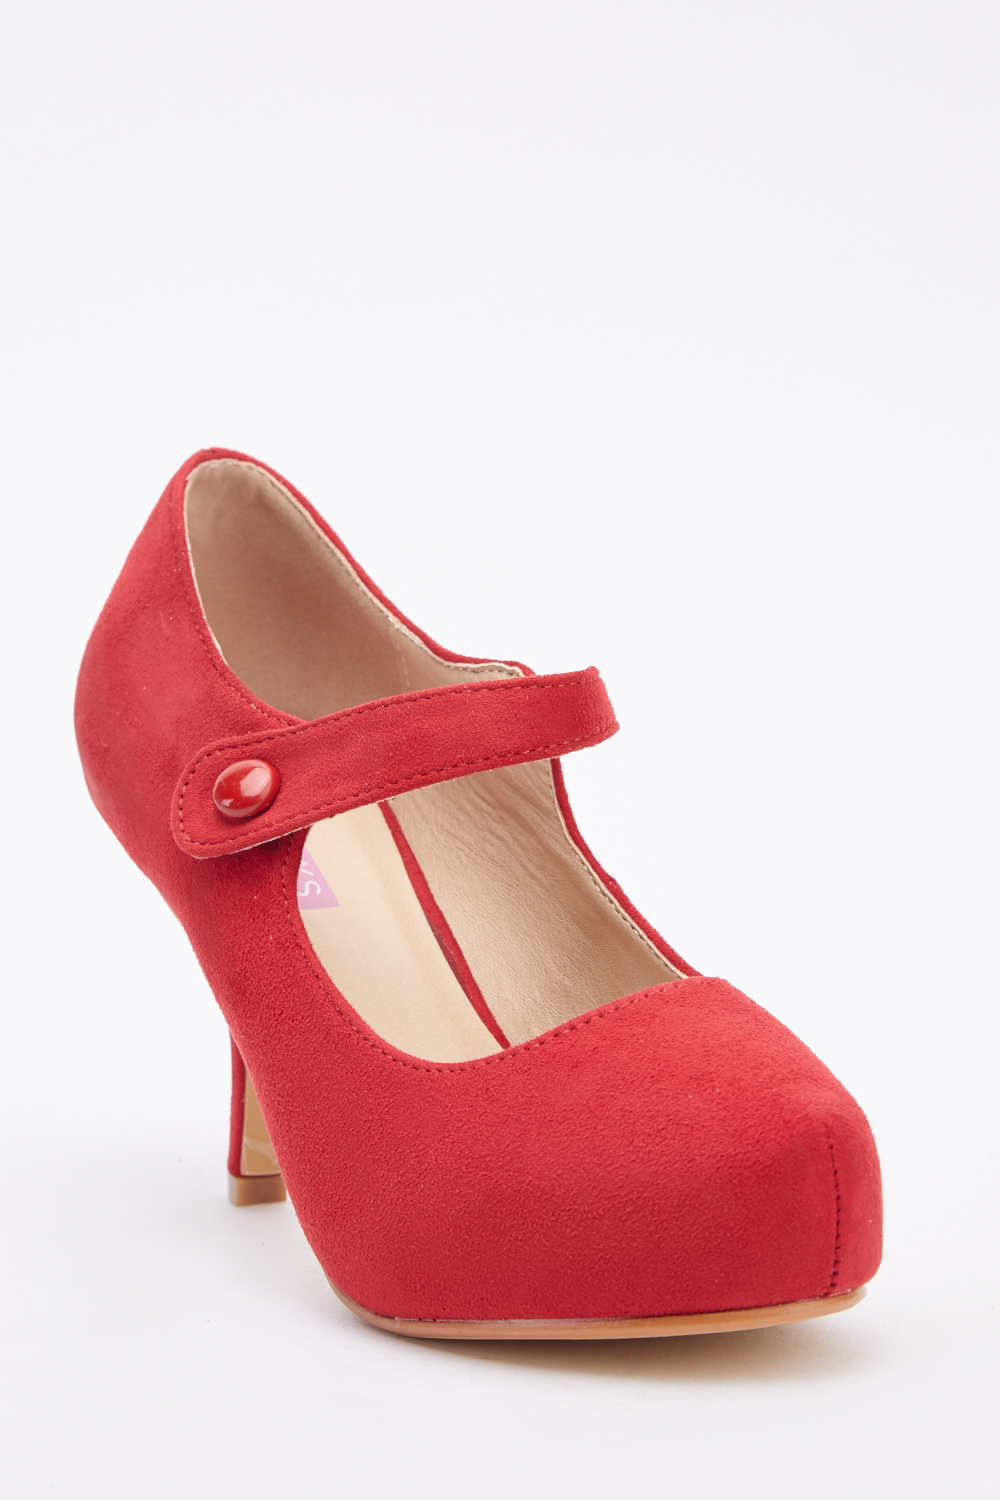 Cone Heel Mary-Jane Shoes - Just $6